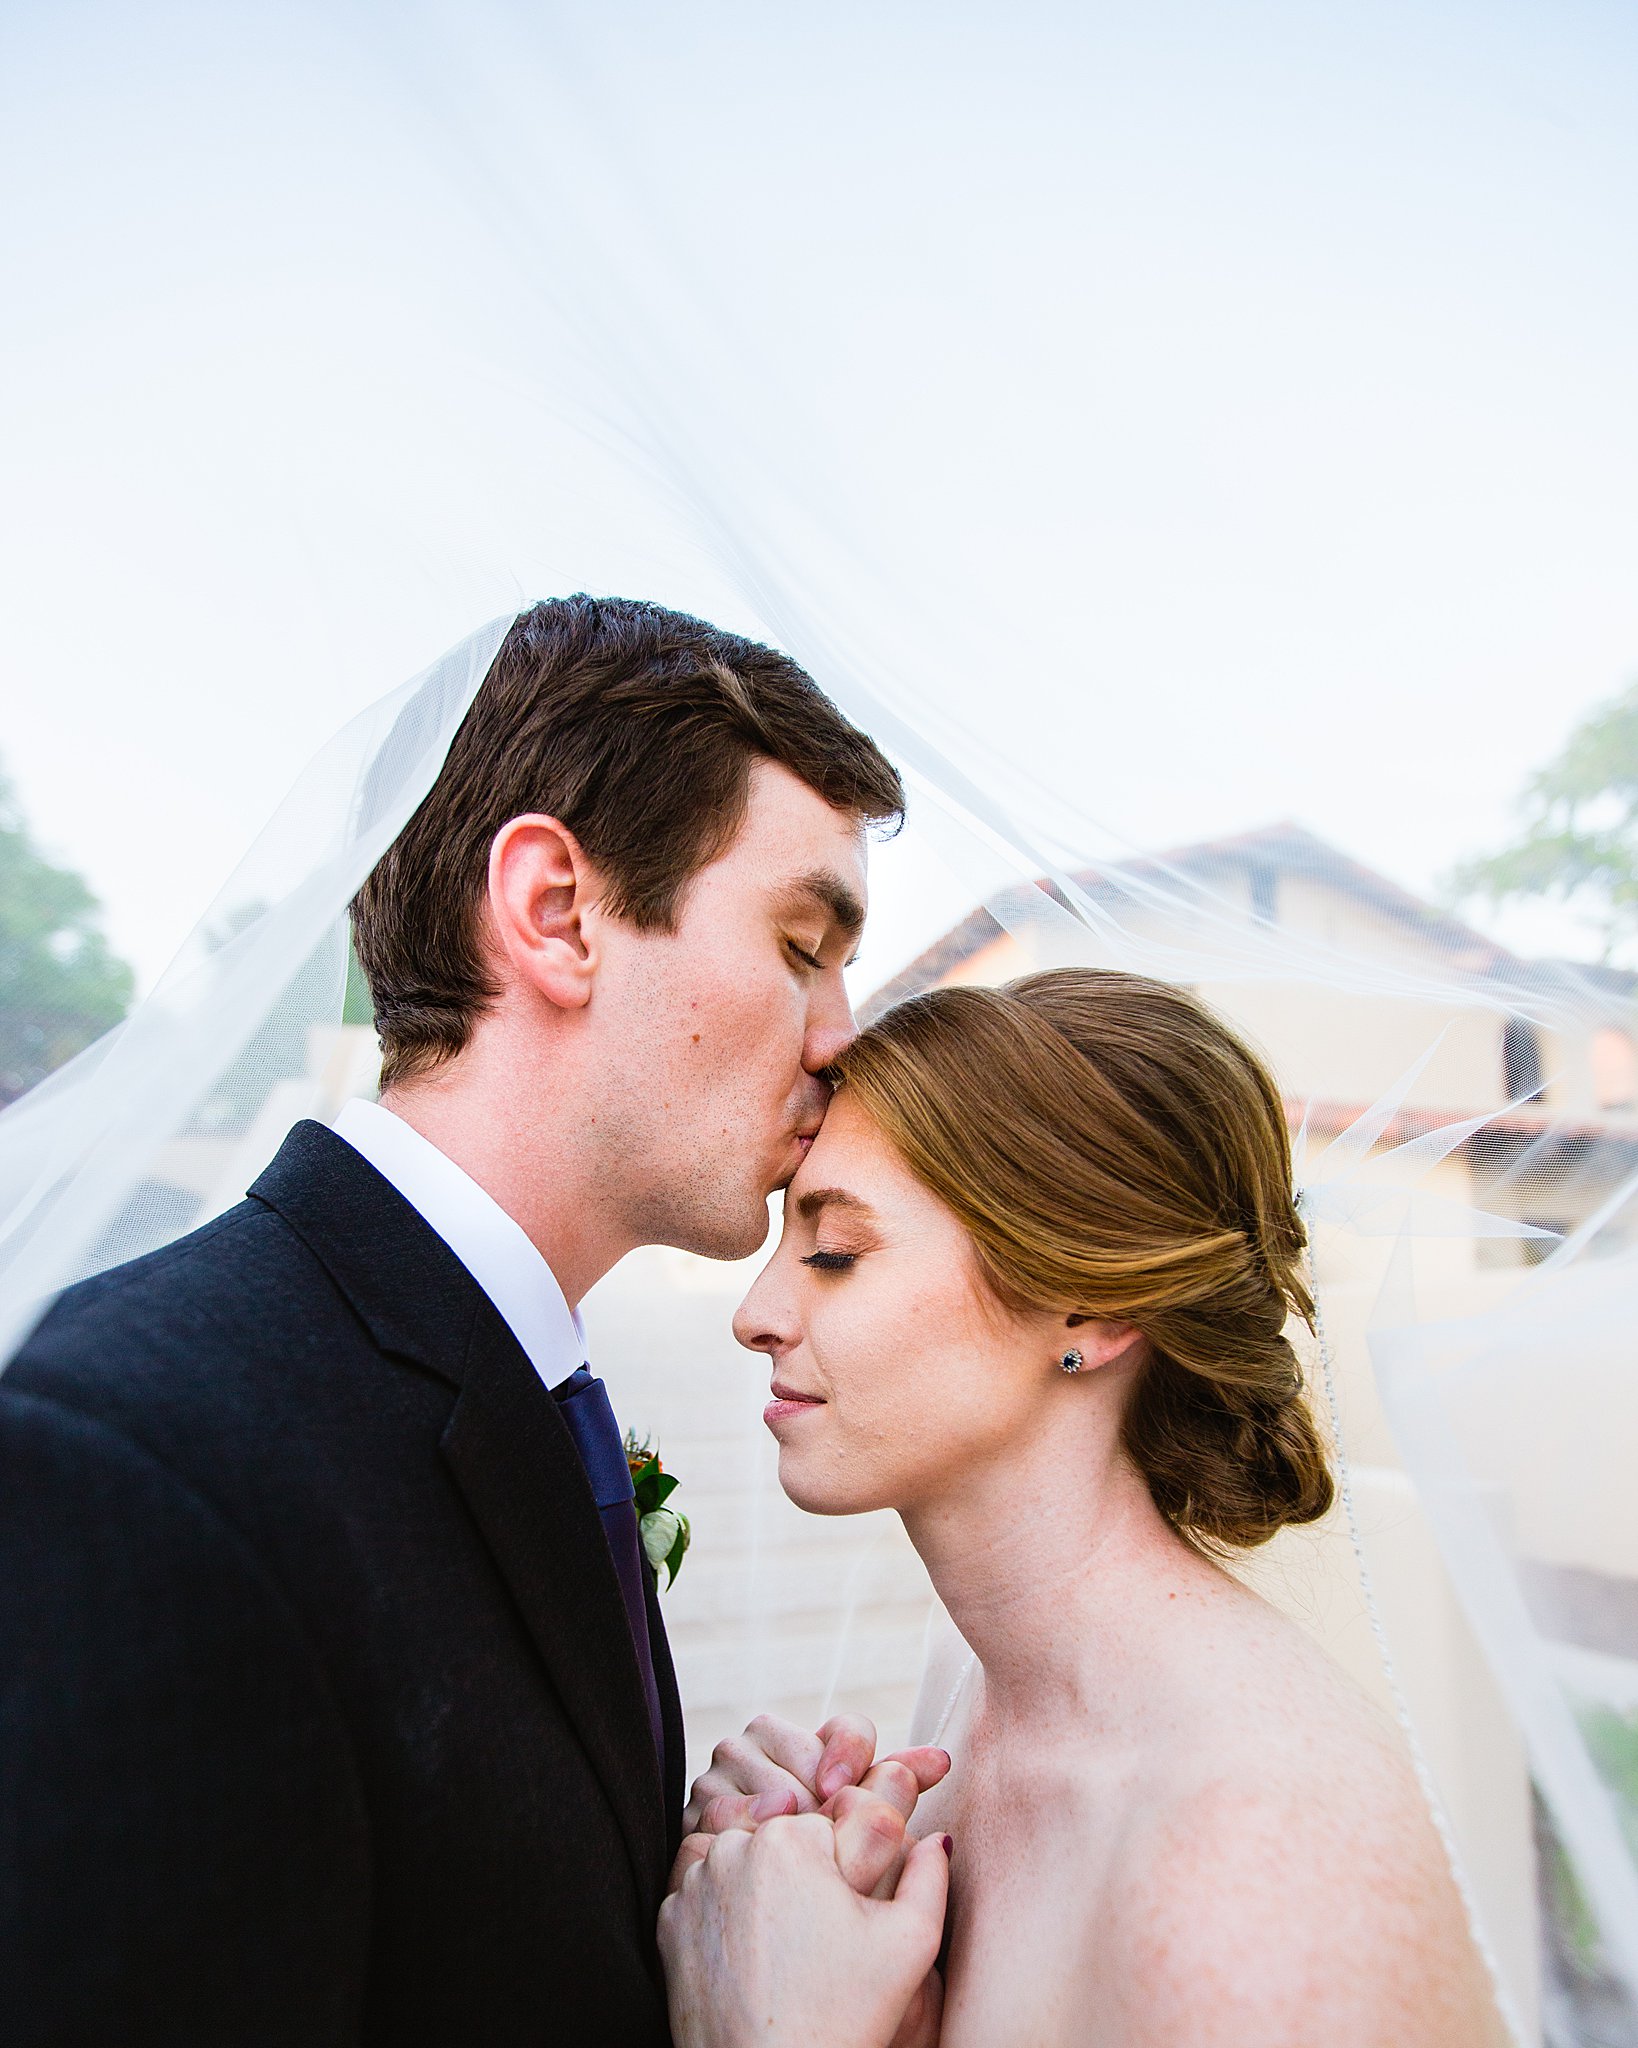 Bride and Groom share a kiss during their Secret Garden Events wedding by Phoenix wedding photographer PMA Photography.